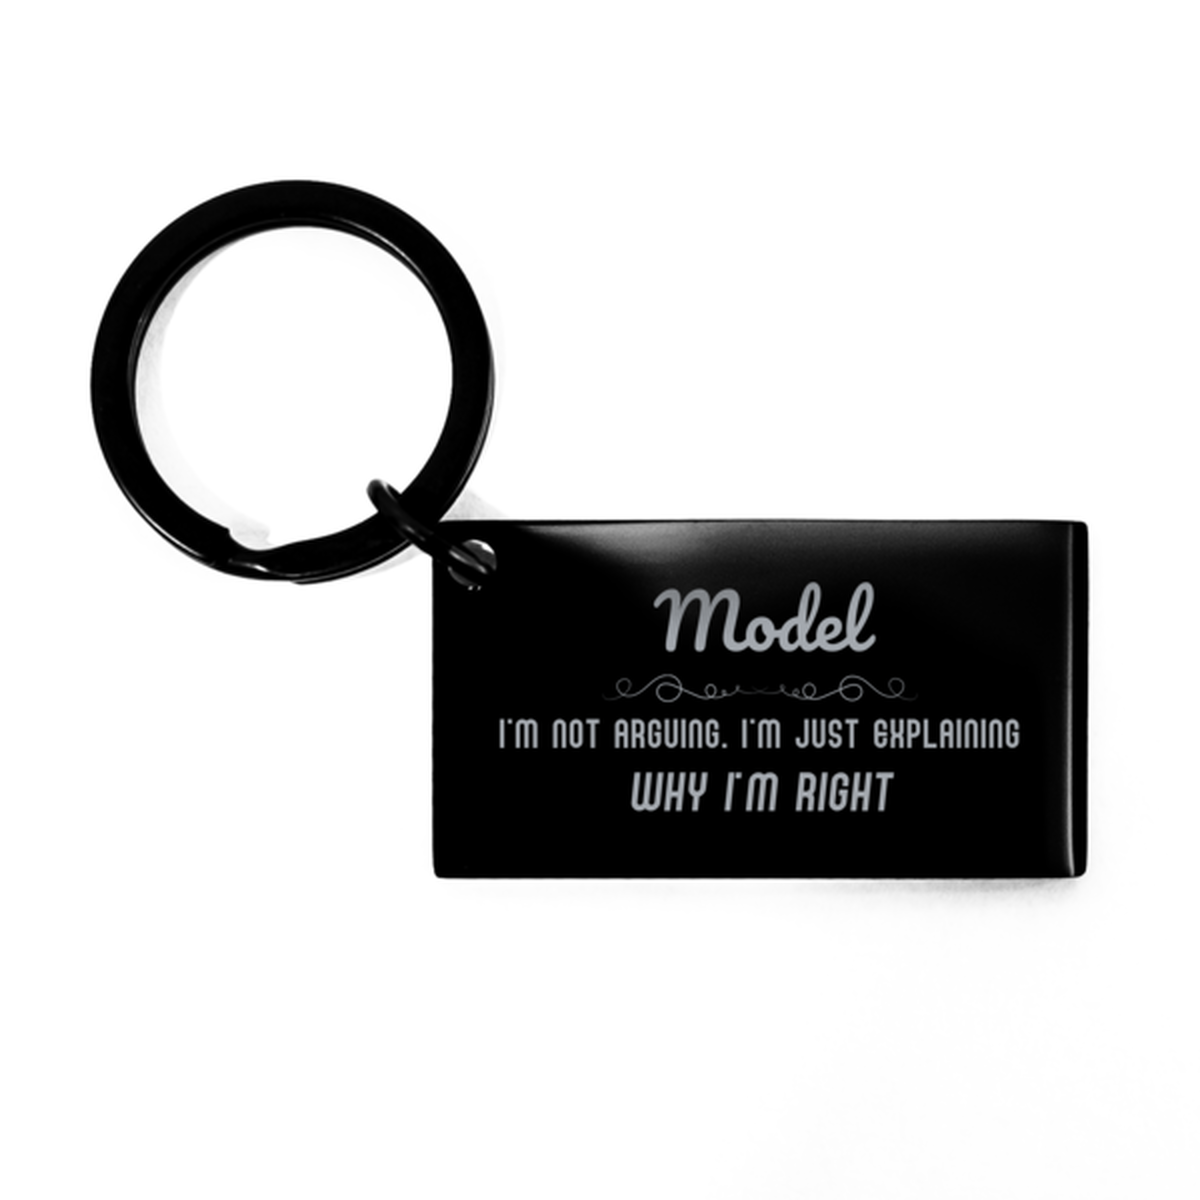 Model I'm not Arguing. I'm Just Explaining Why I'm RIGHT Keychain, Funny Saying Quote Model Gifts For Model Graduation Birthday Christmas Gifts for Men Women Coworker